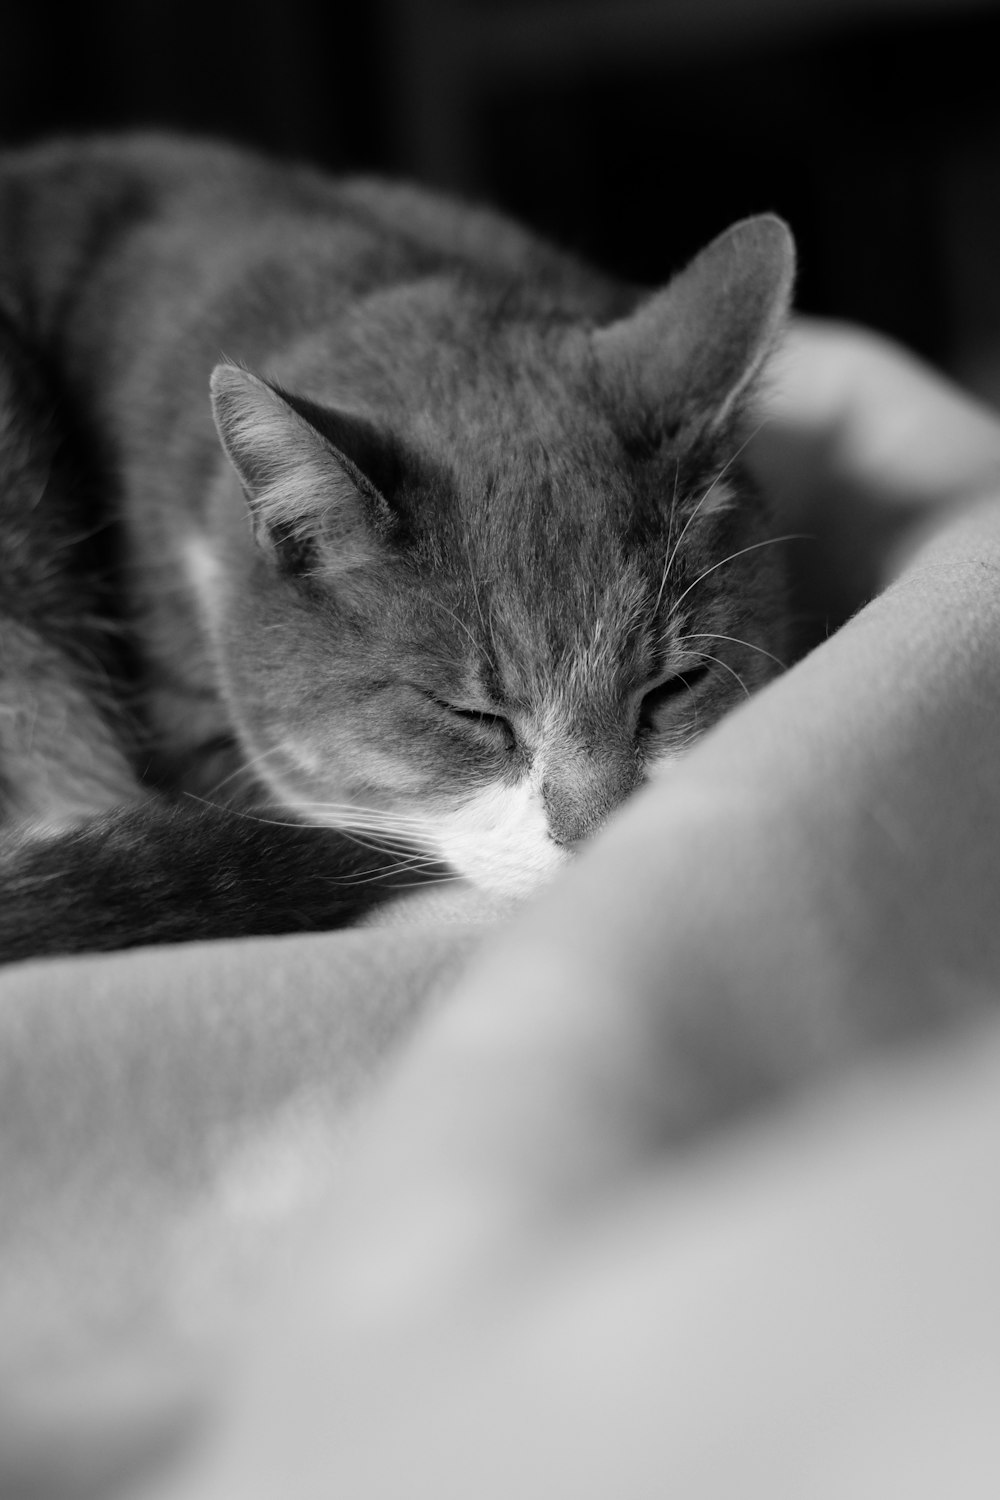 grayscale photo of tabby cat lying on textile